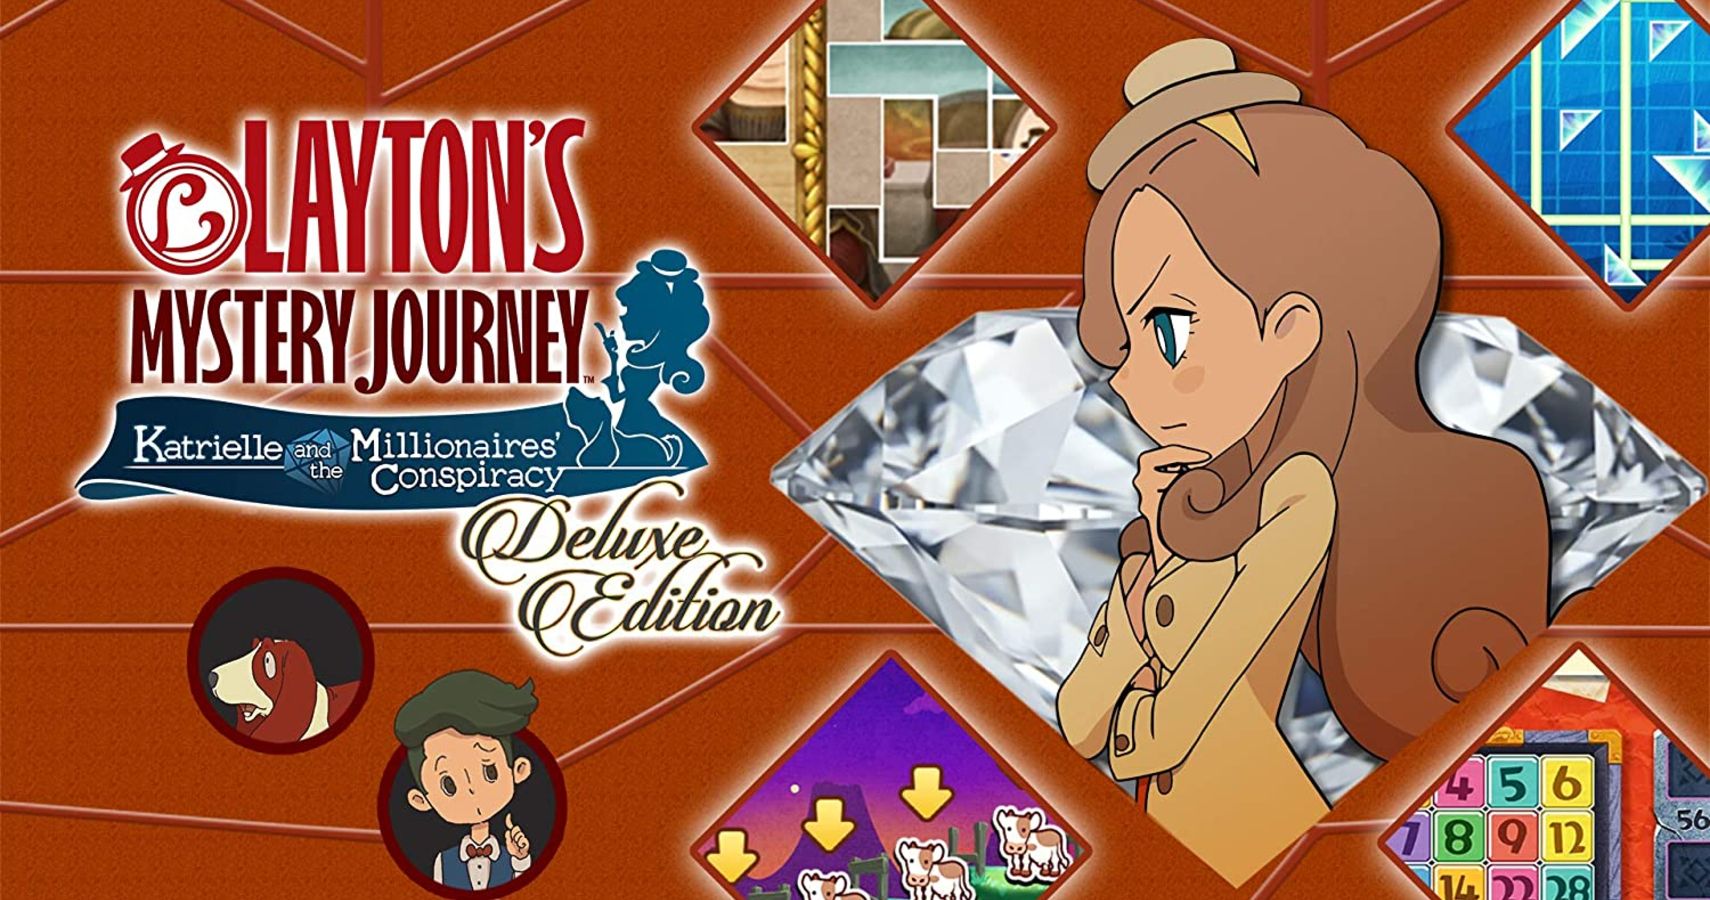 Official Art from Layton’s Mystery Journey: Katrielle and The Millionaires’ Conspiracy Deluxe Edition